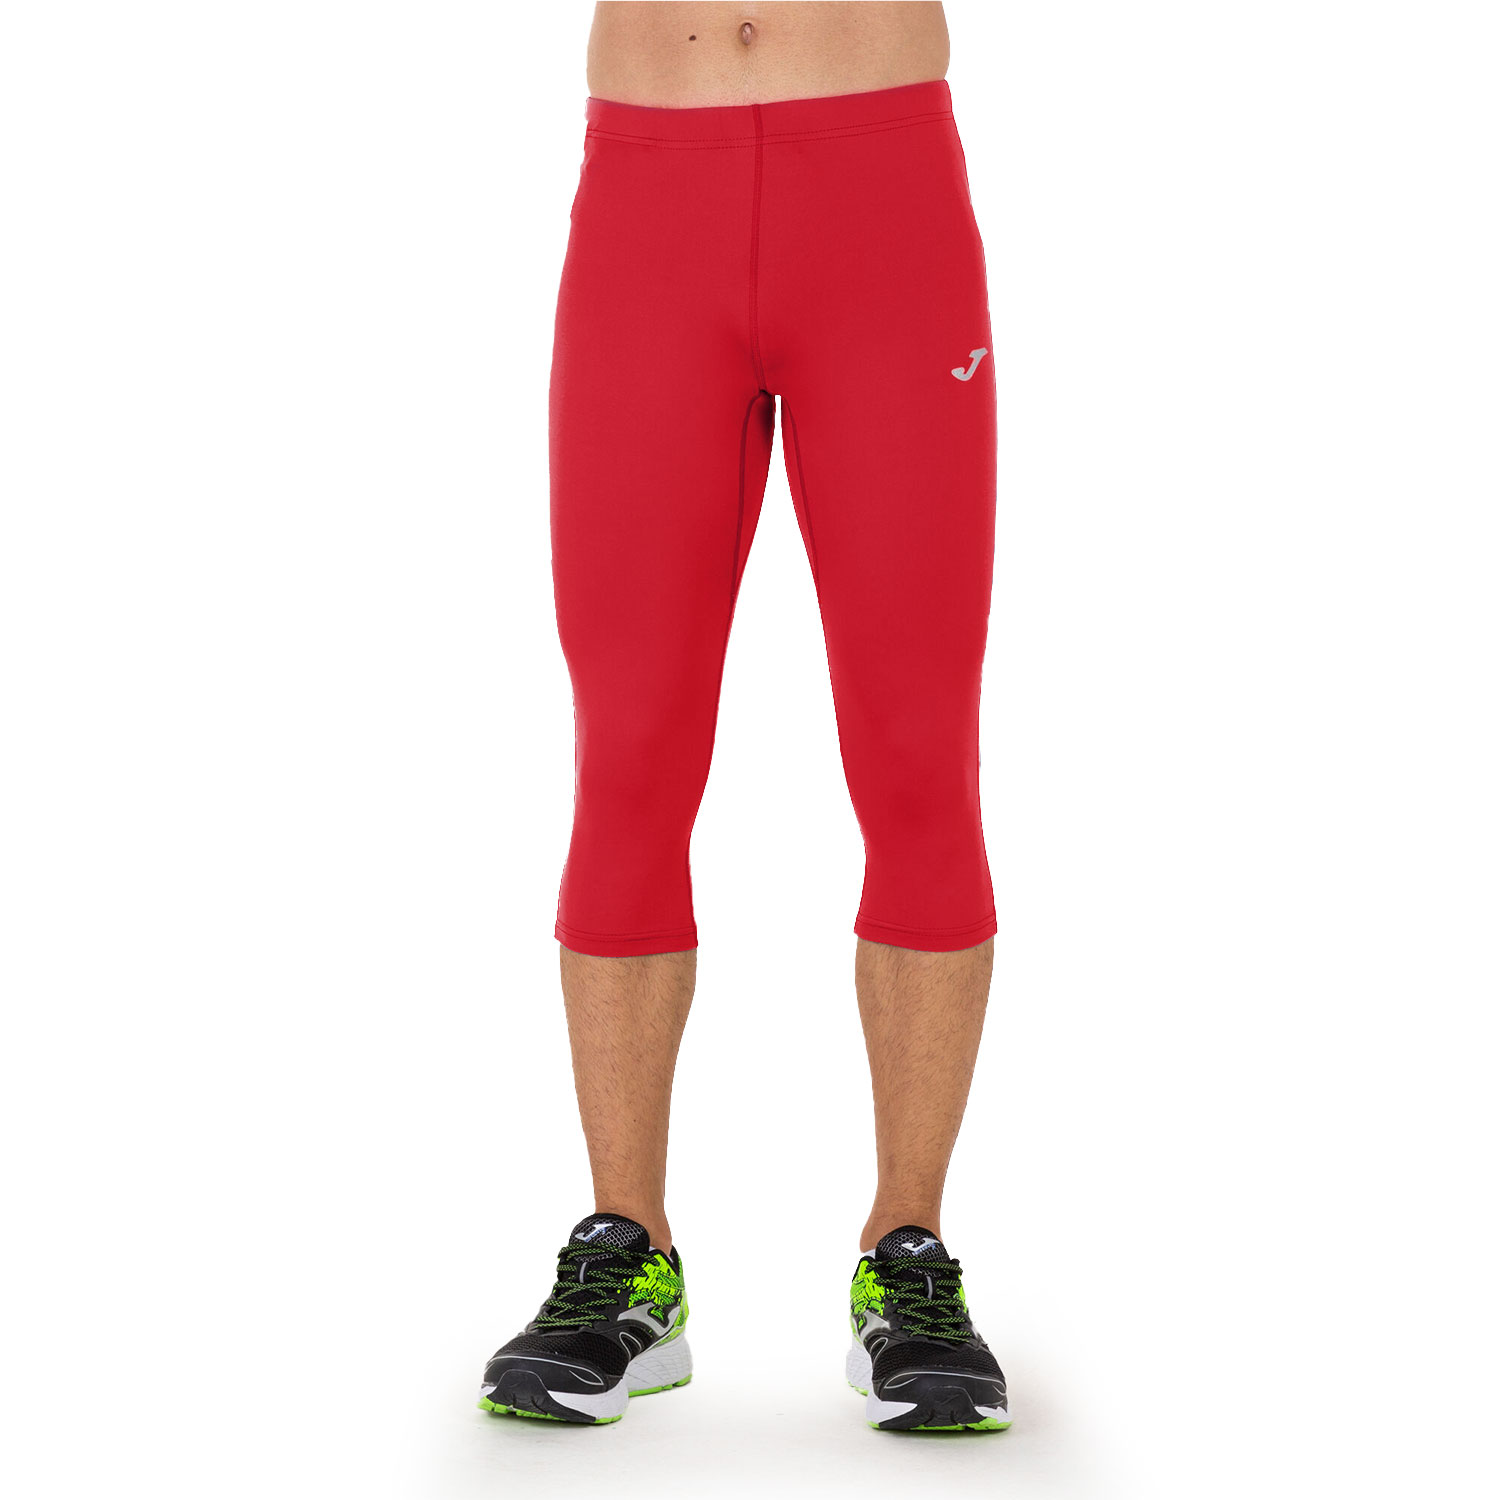 https://www.misterrunning.com/images/2022-media-6/joma-pirate-tight-lunghi-red-100089600_A_1.jpg